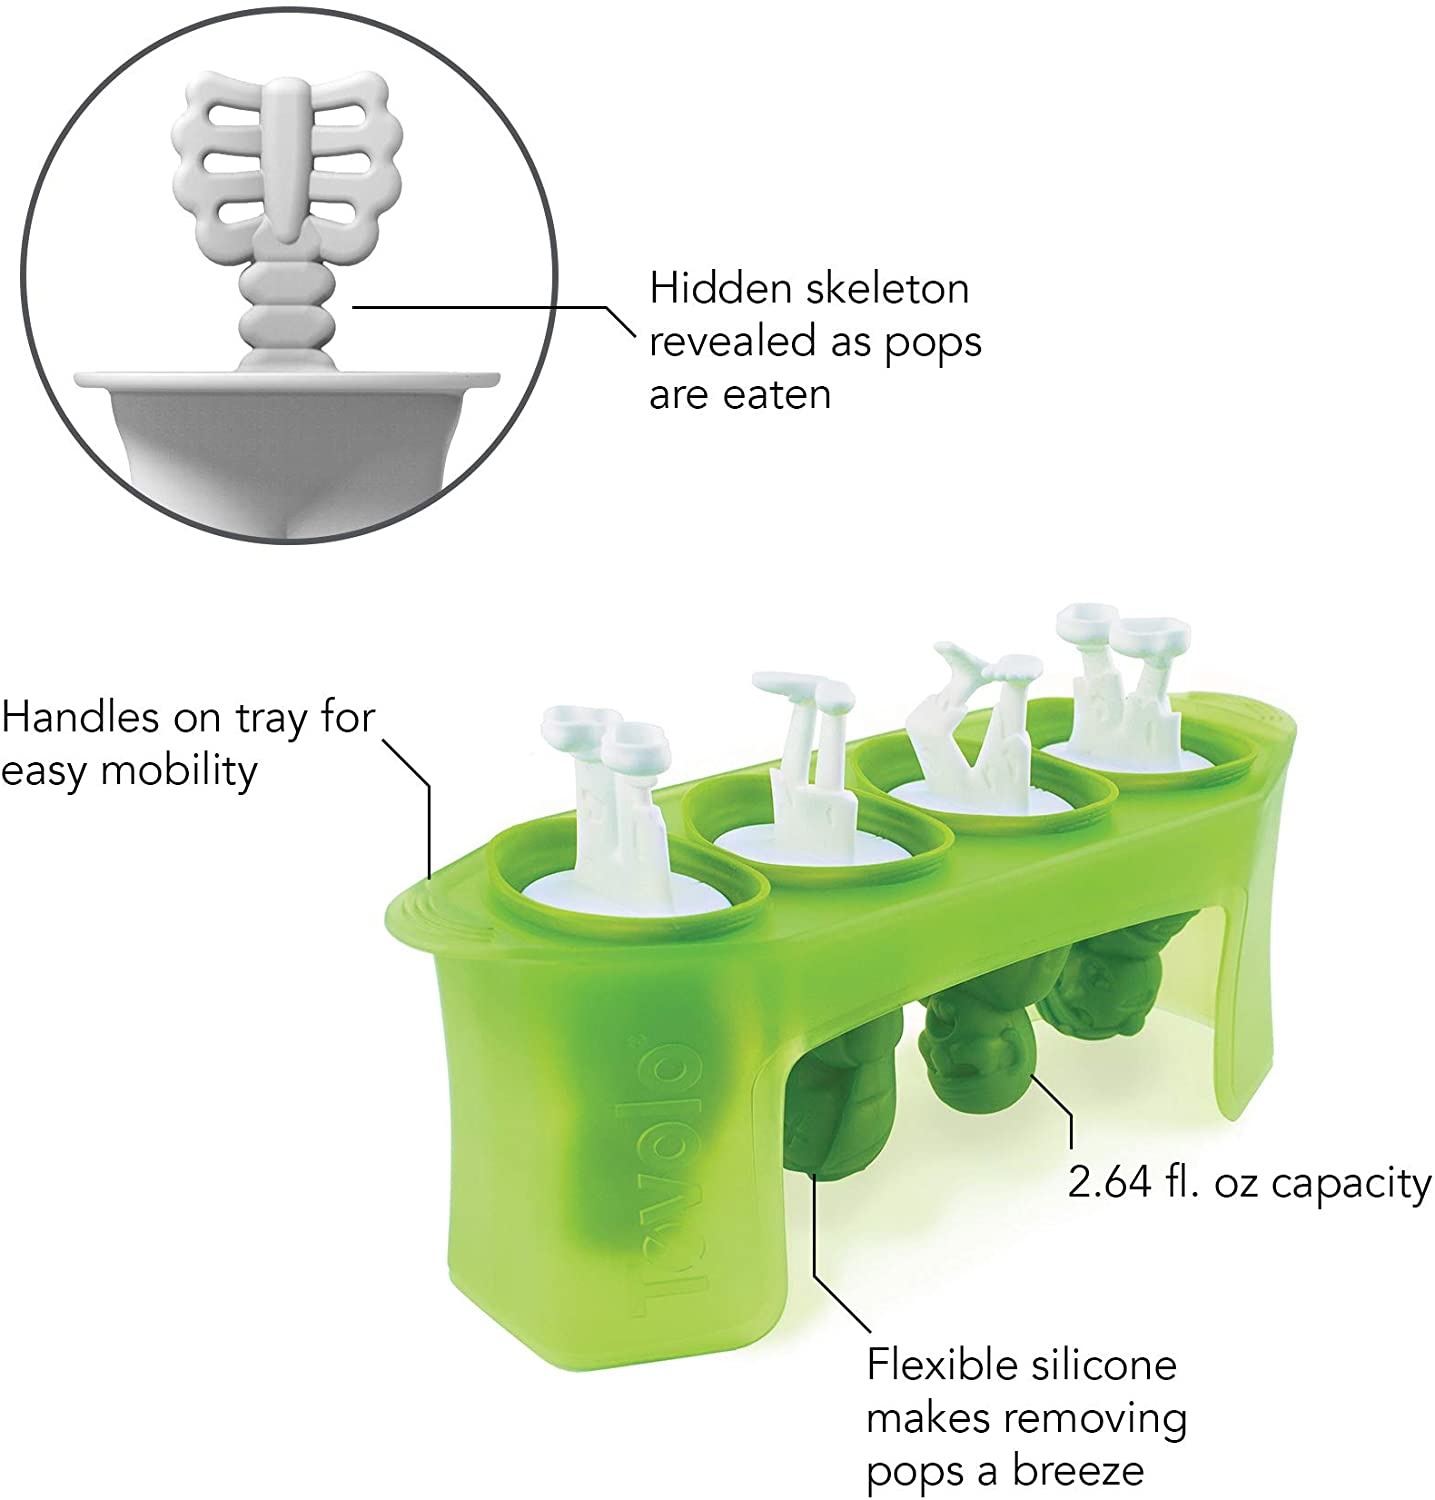 Tovolo Twin Pops Popsicle Molds Makers Set of 4 Makes 8 Juice Yogurt Ice  Cream for sale online